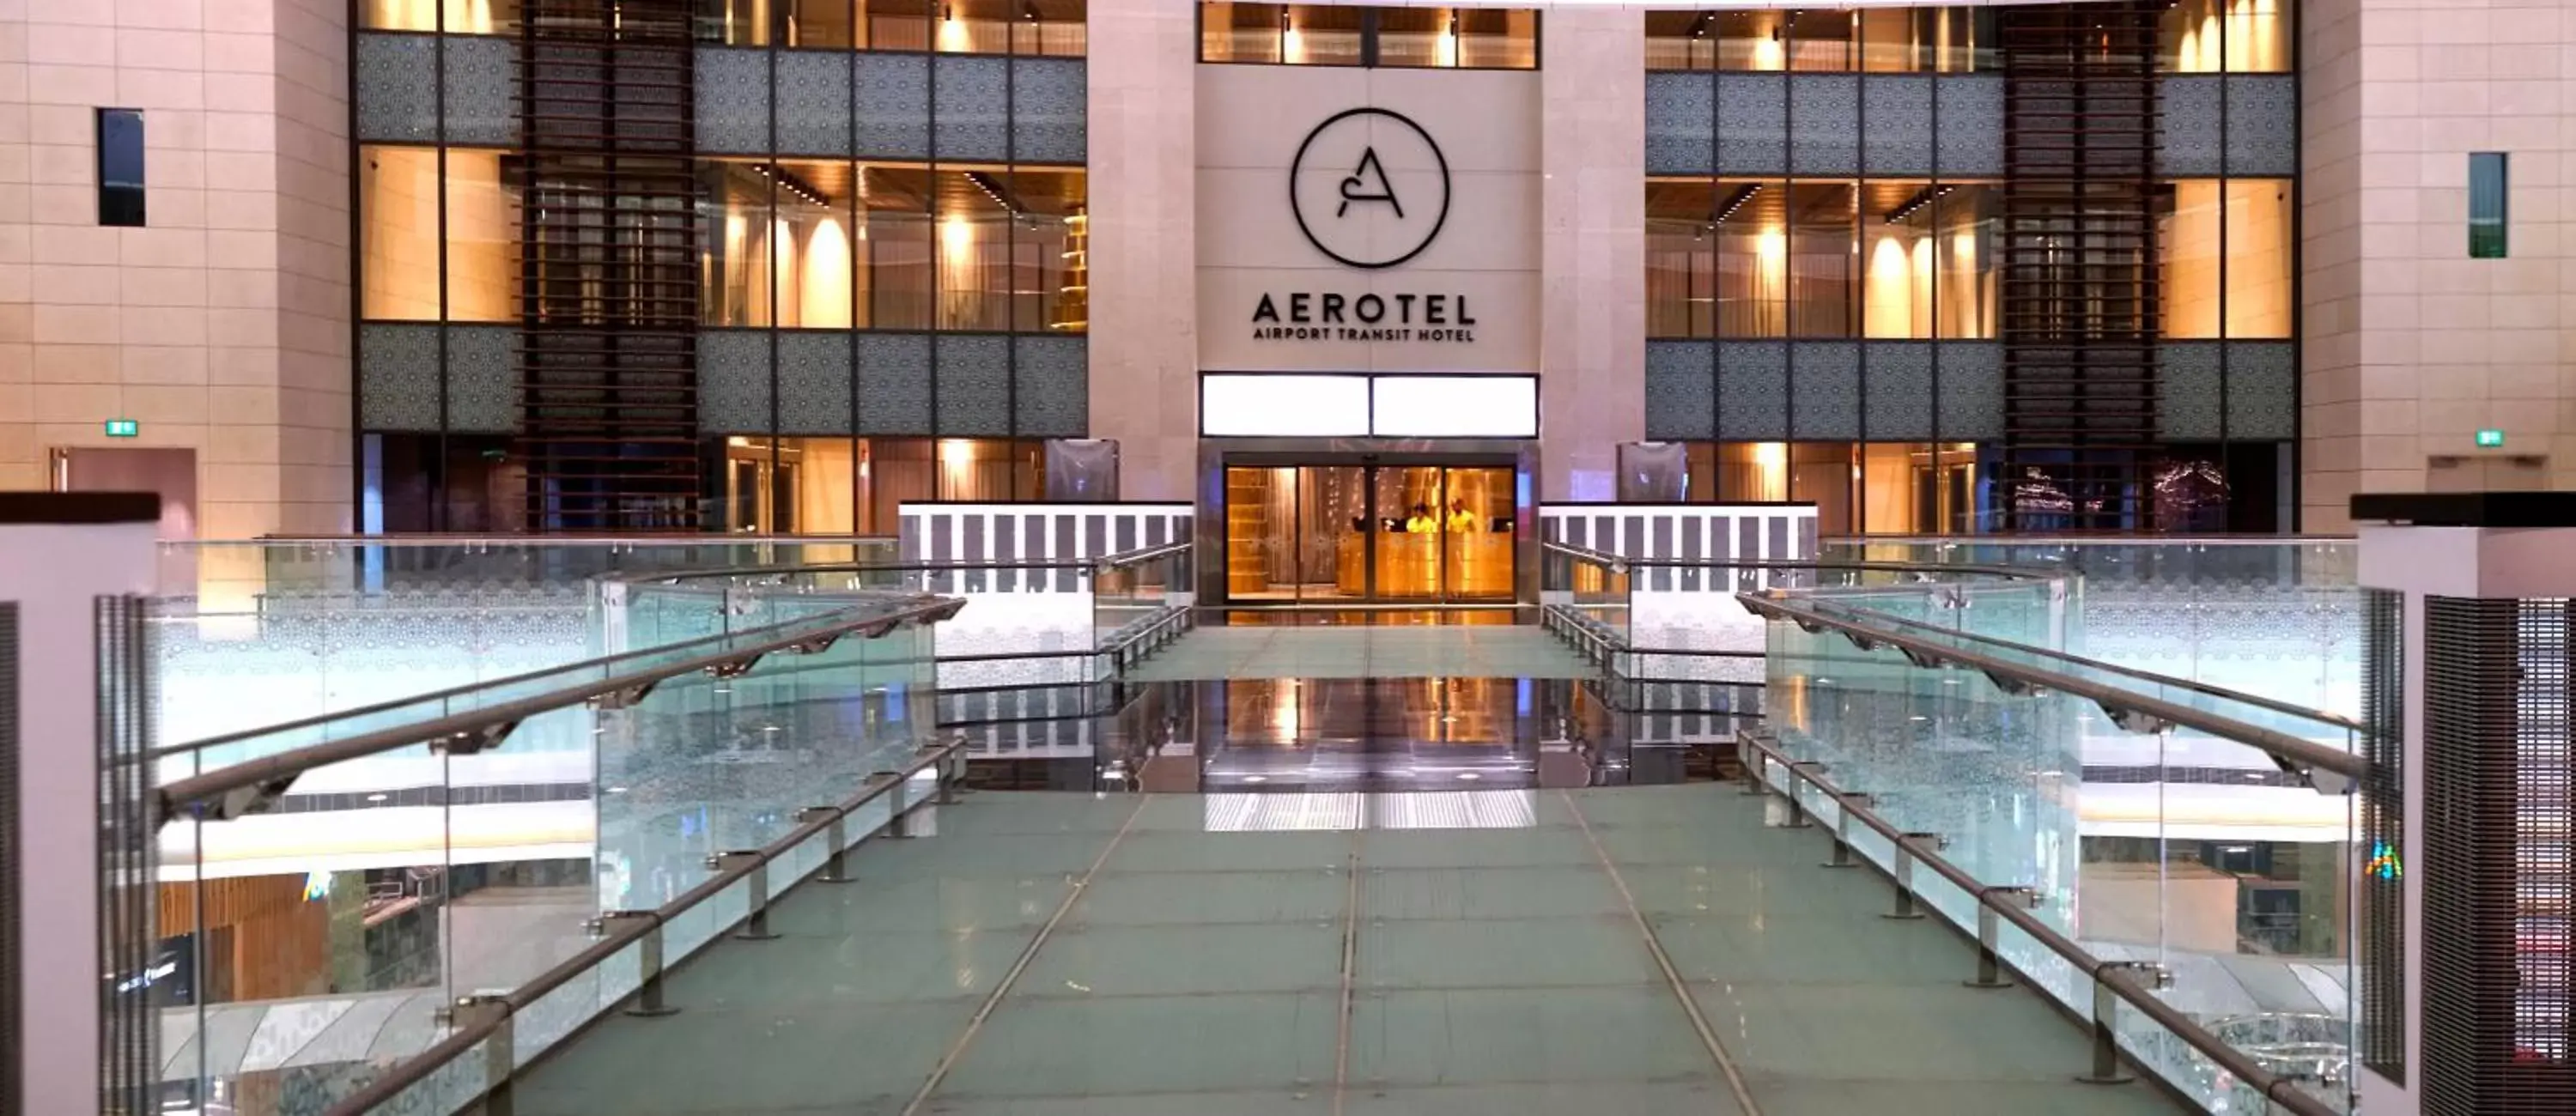 Property building in Aerotel Muscat - Airport Transit Hotel